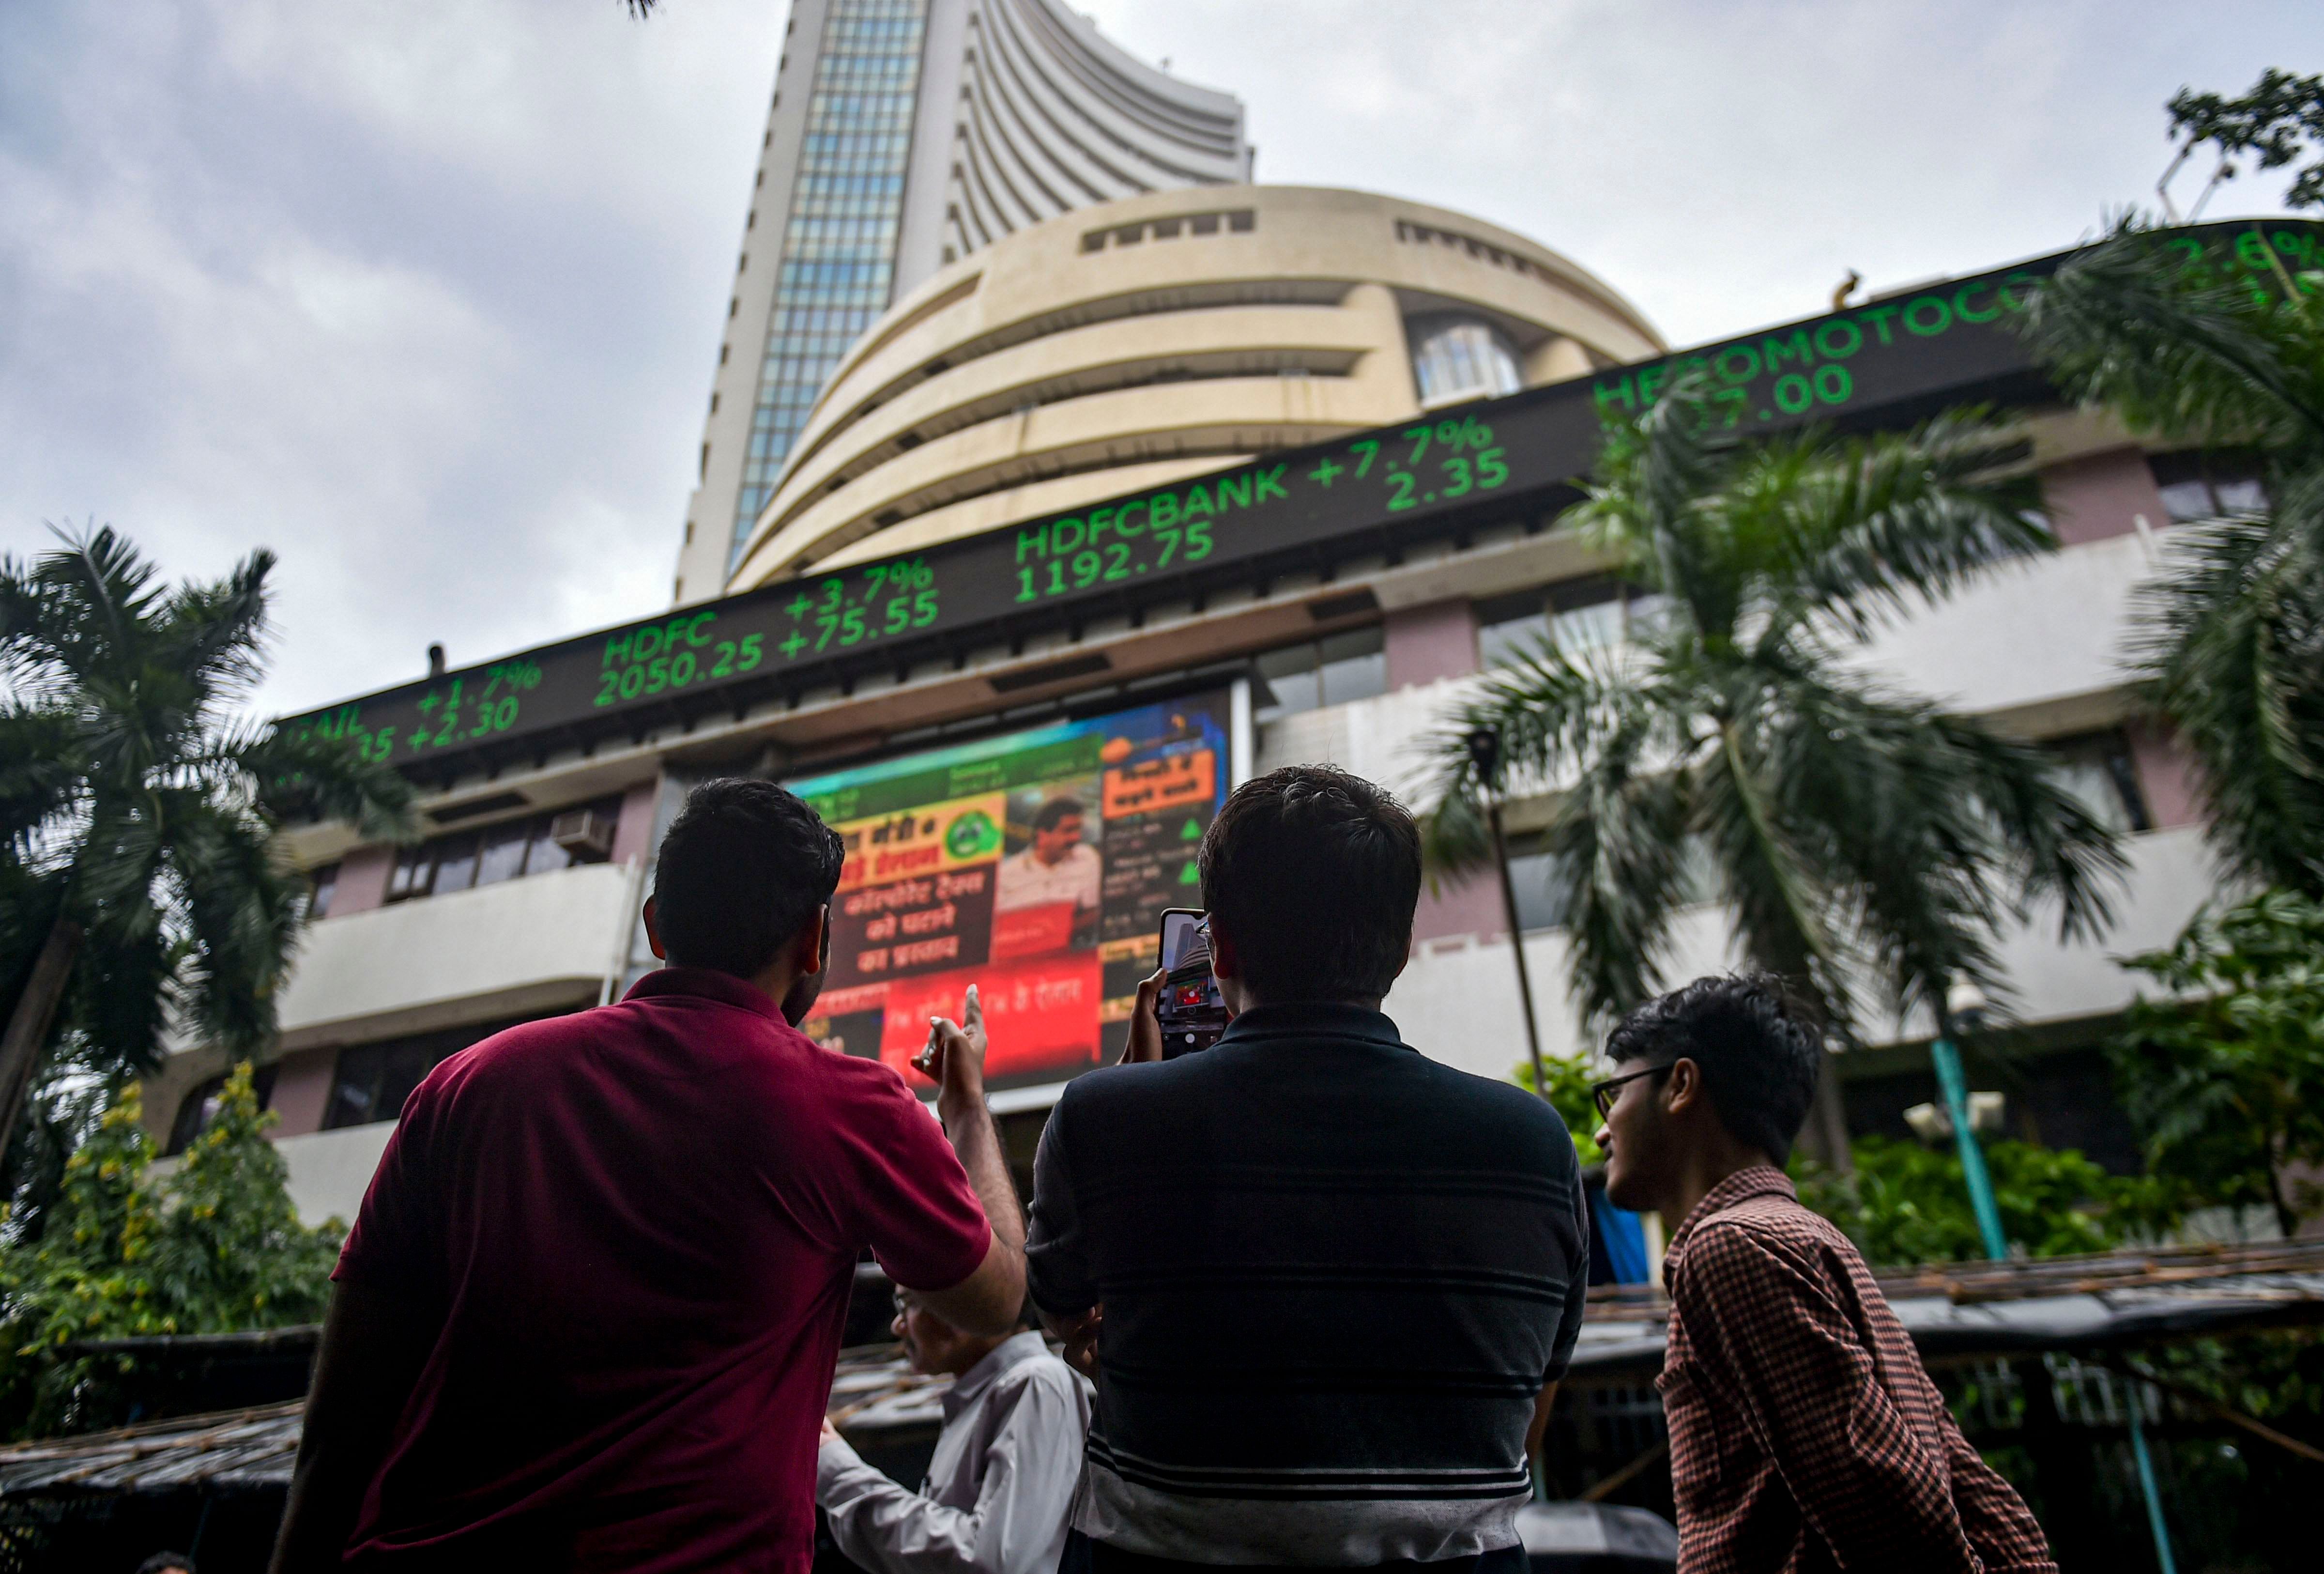 Bystanders react as they watch the stock prices displayed on a digital screen outside BSE building, in Mumbai. (PTI Photo)